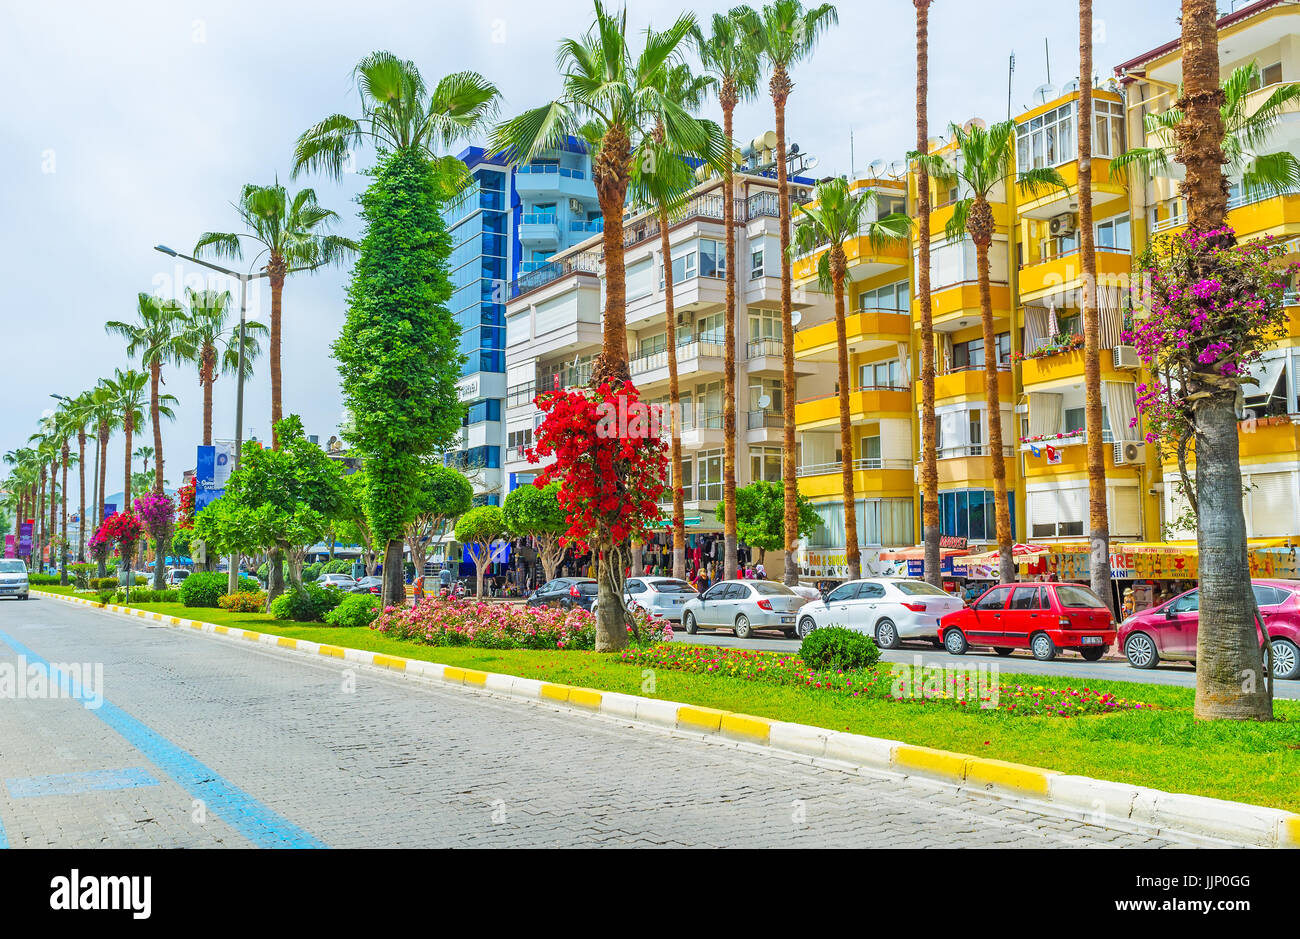 ALANYA, TURKEY - MAY 9, 2017: The Ataturk Boulevard is the central shopping street, decorated with different plants and flowers, here the colorful flo Stock Photo